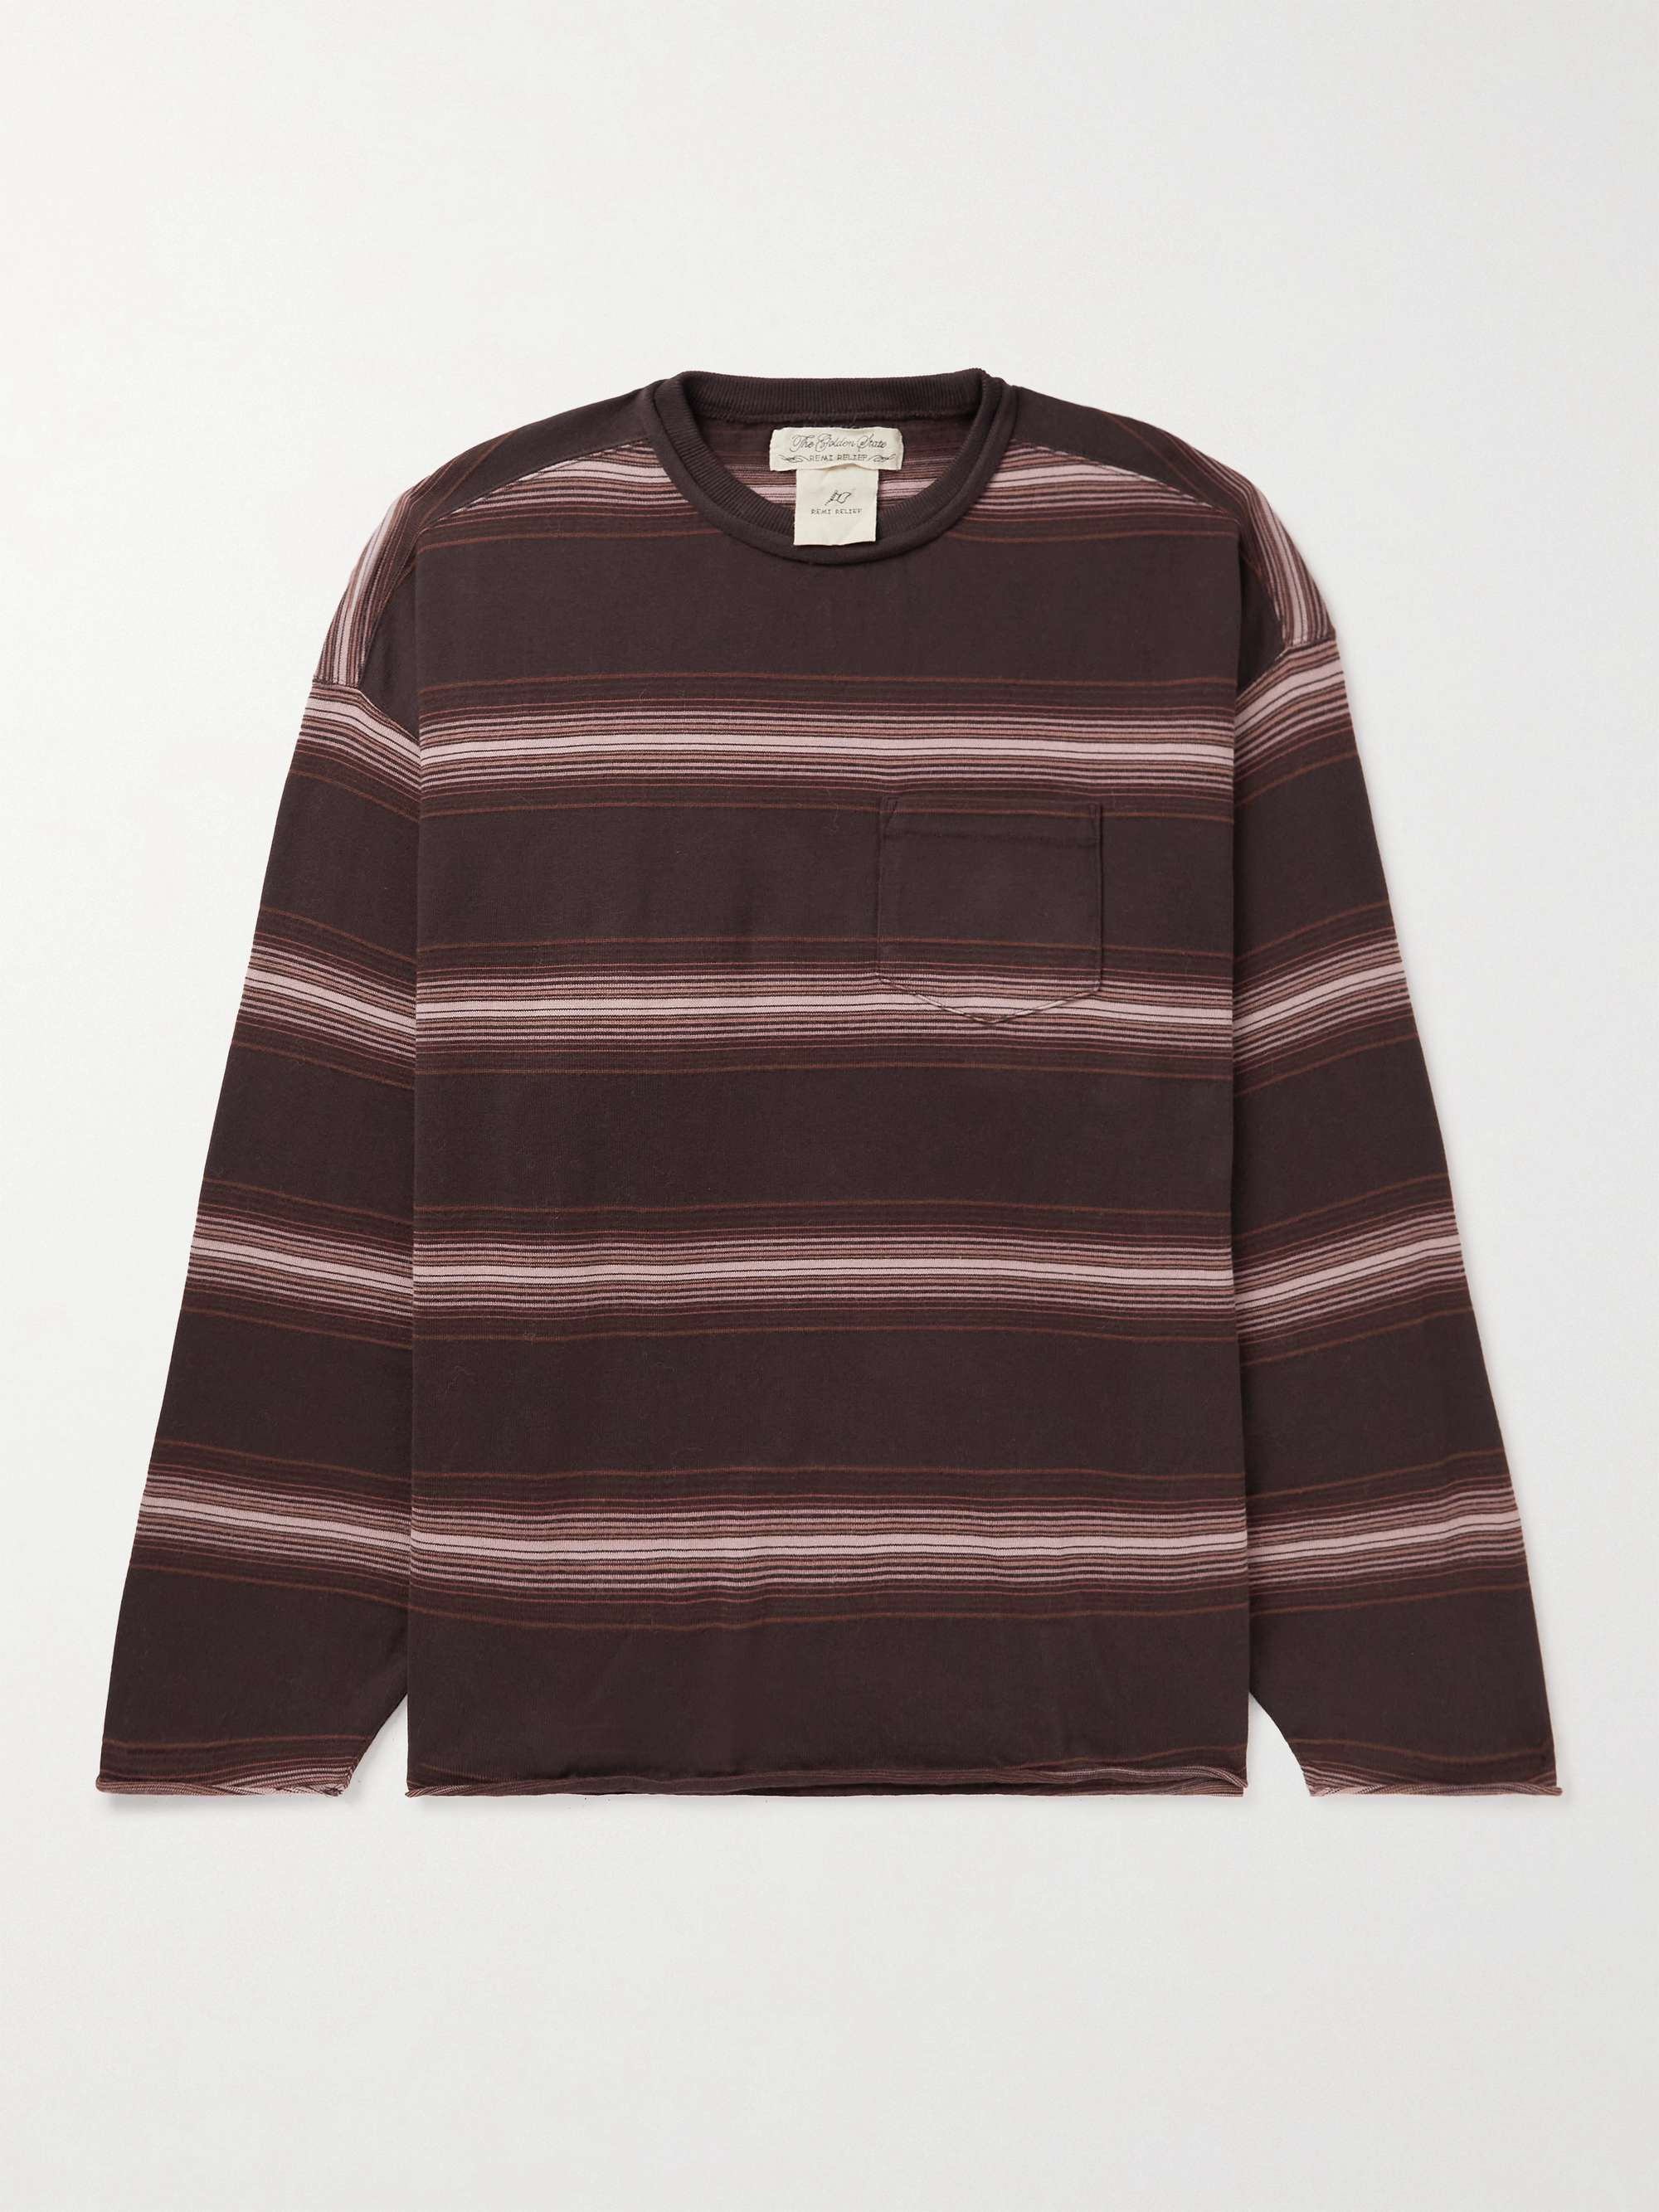 Brown Striped Cotton-Blend Jersey T-Shirt | REMI RELIEF | MR PORTER